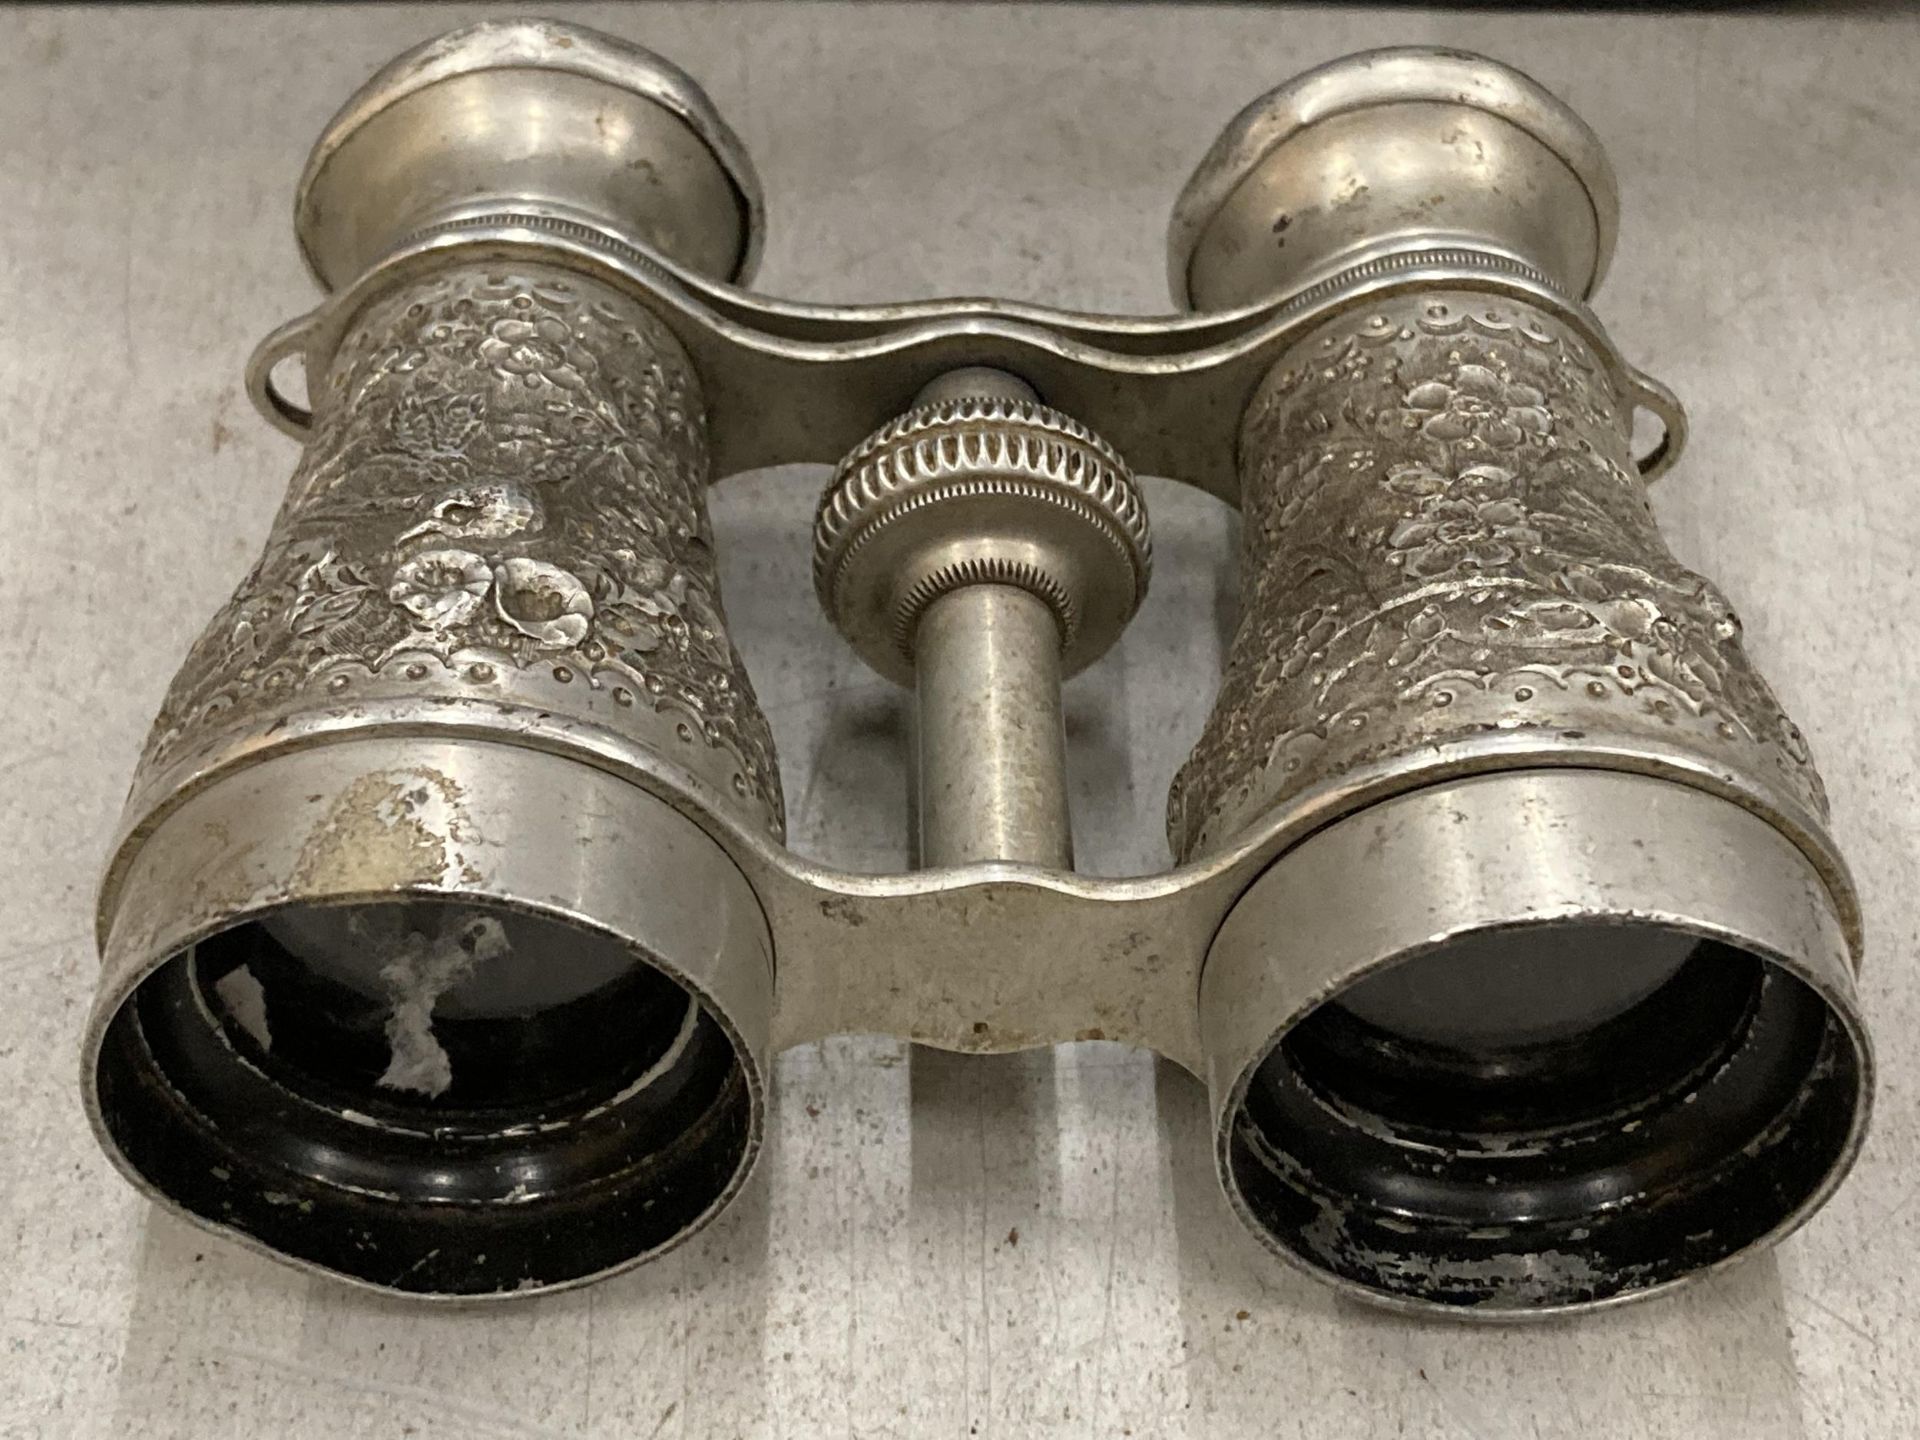 A GROUP OF BINOCULARS TO INCLUDE KERSHAM BINO PRISM NO.2 MK II AND ZENITH EXAMPLES - Image 4 of 5